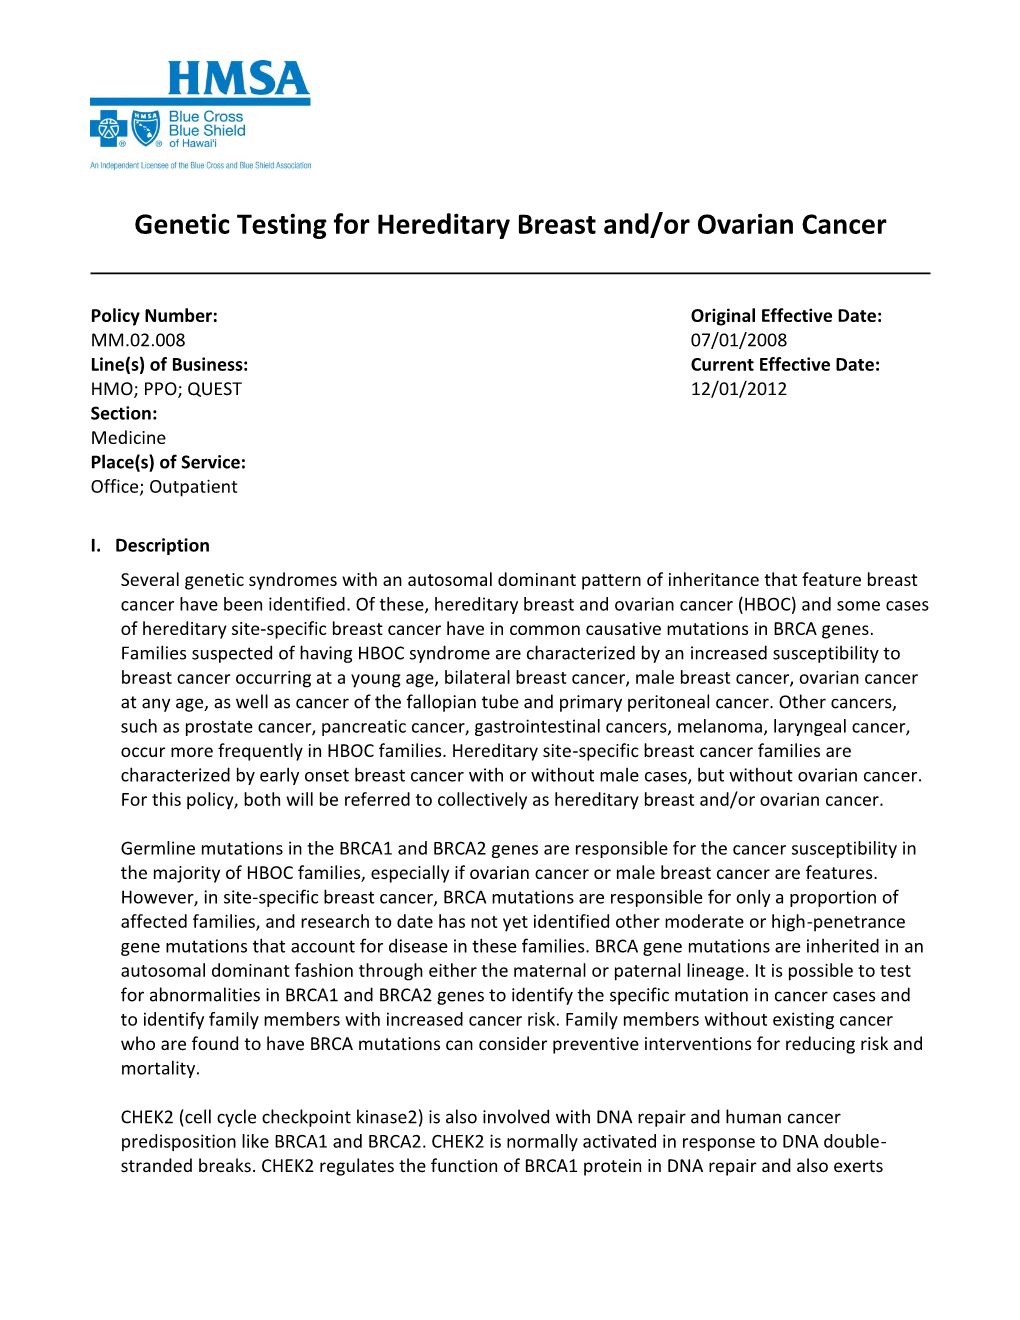 Genetic Testing for Hereditary Breast And/Or Ovarian Cancer